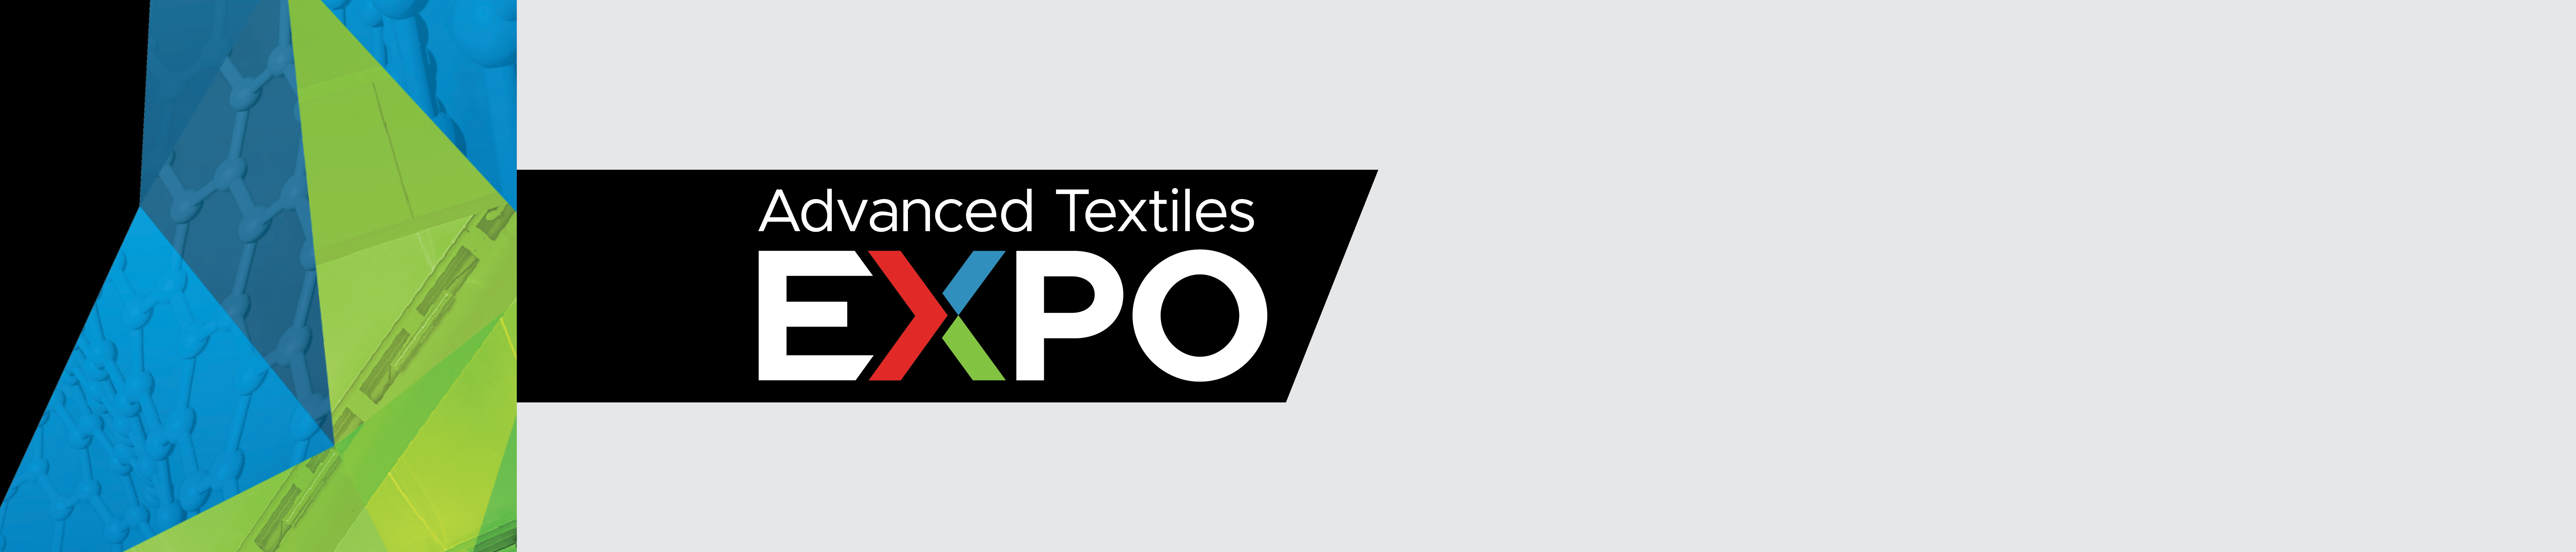 Advanced Textiles Expo: New name, improved event – Fabric Architecture Magazine